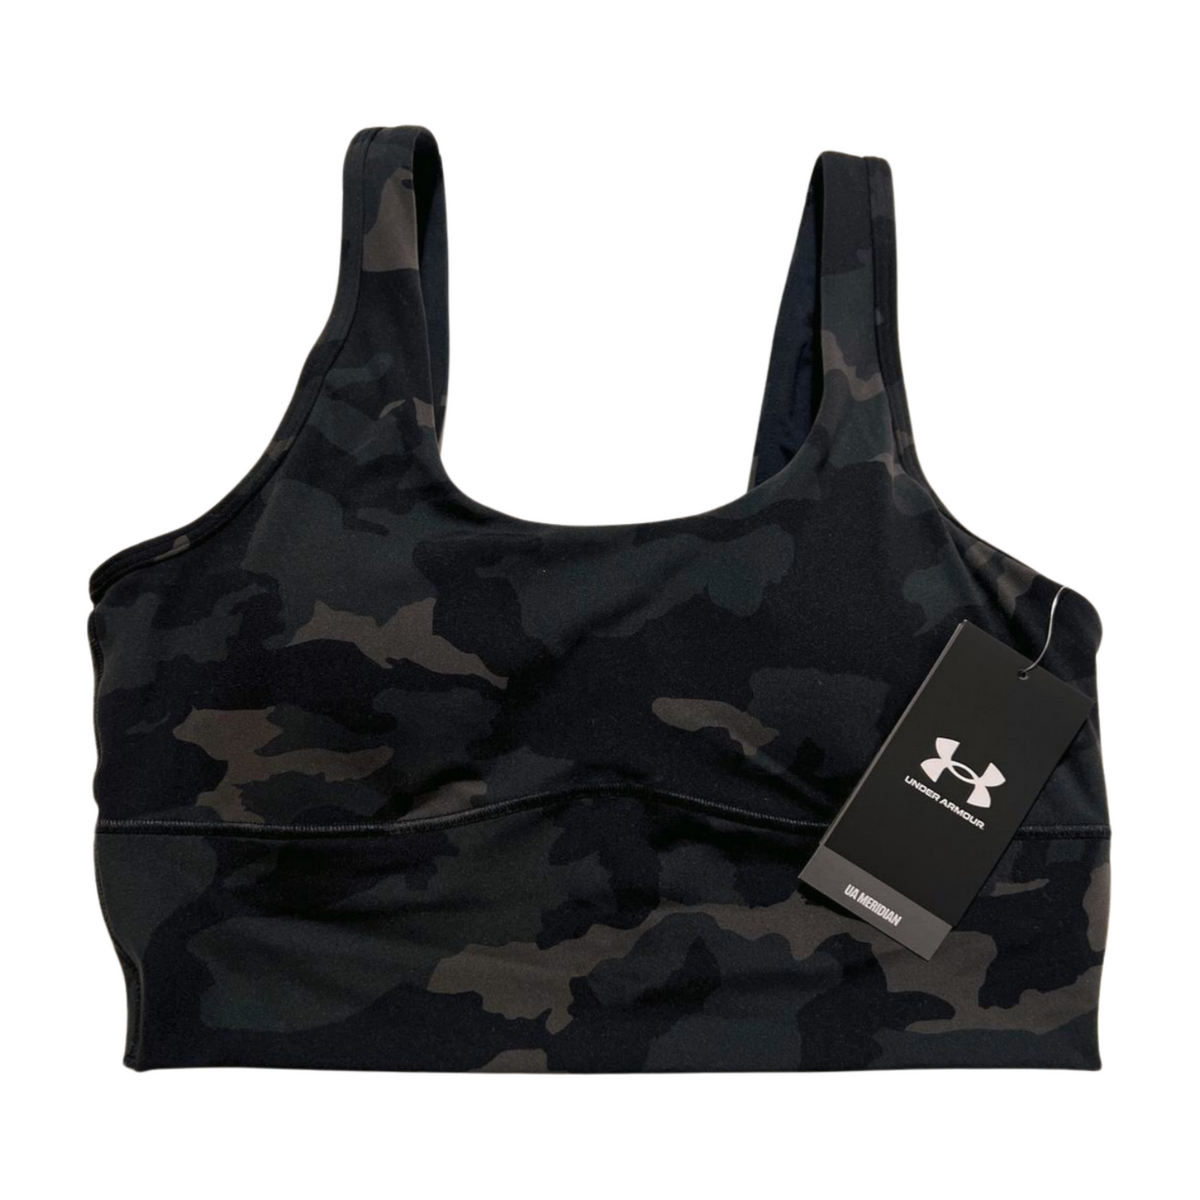 Under Armour- Black Camo Sports Bra NEW WITH TAGS!